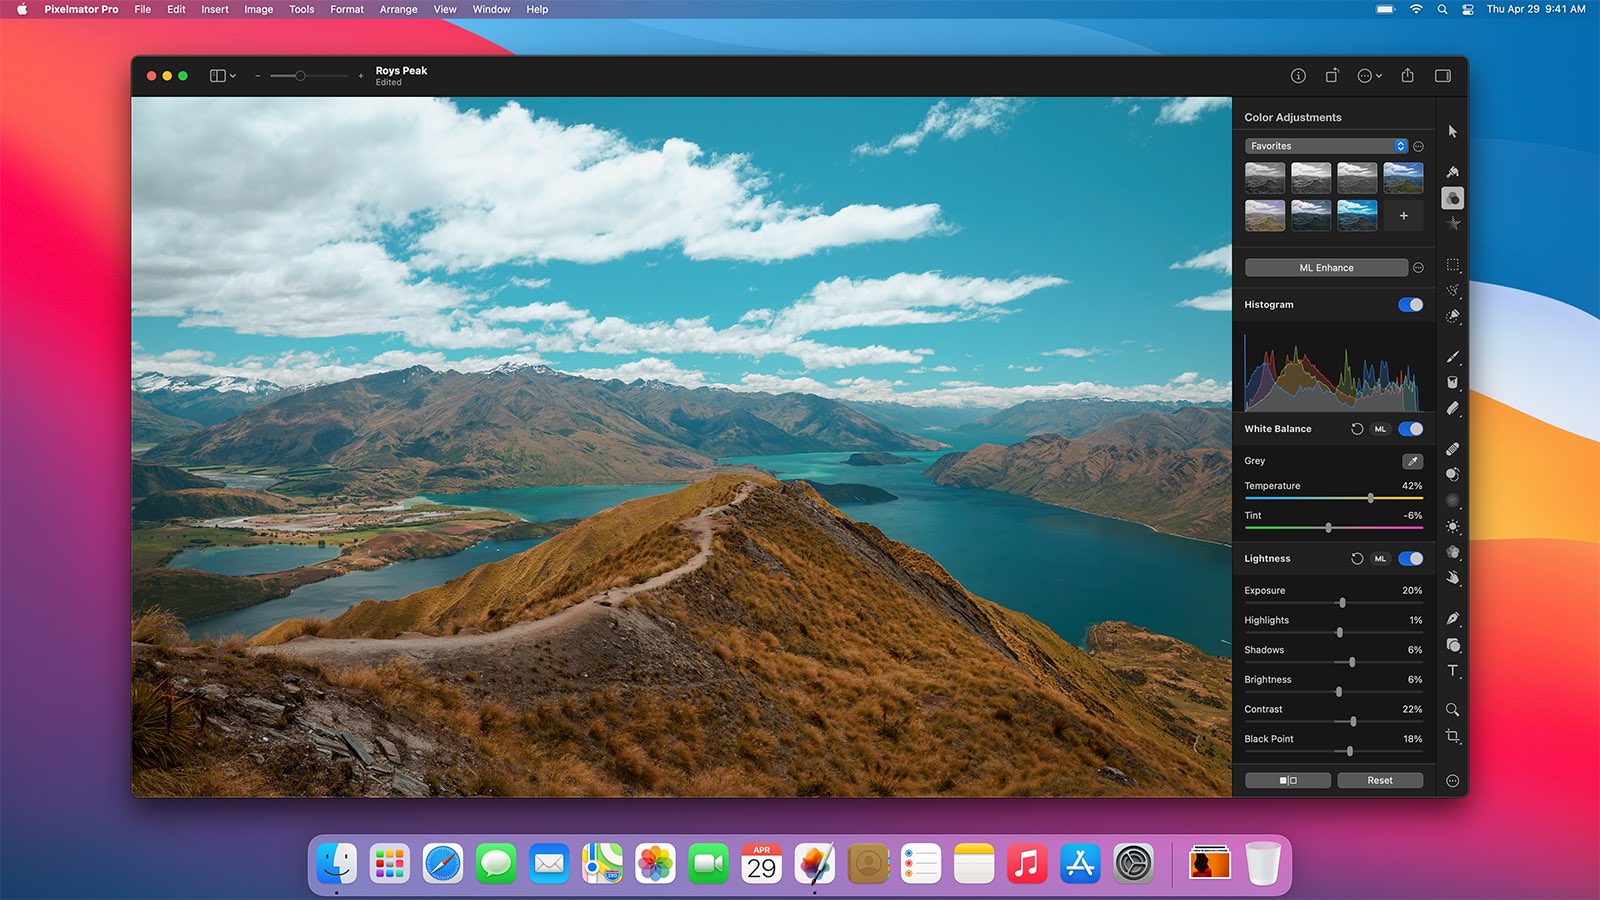 A Mac screenshot displaying LUT color adjustments in the Pixelmator Pro image editor